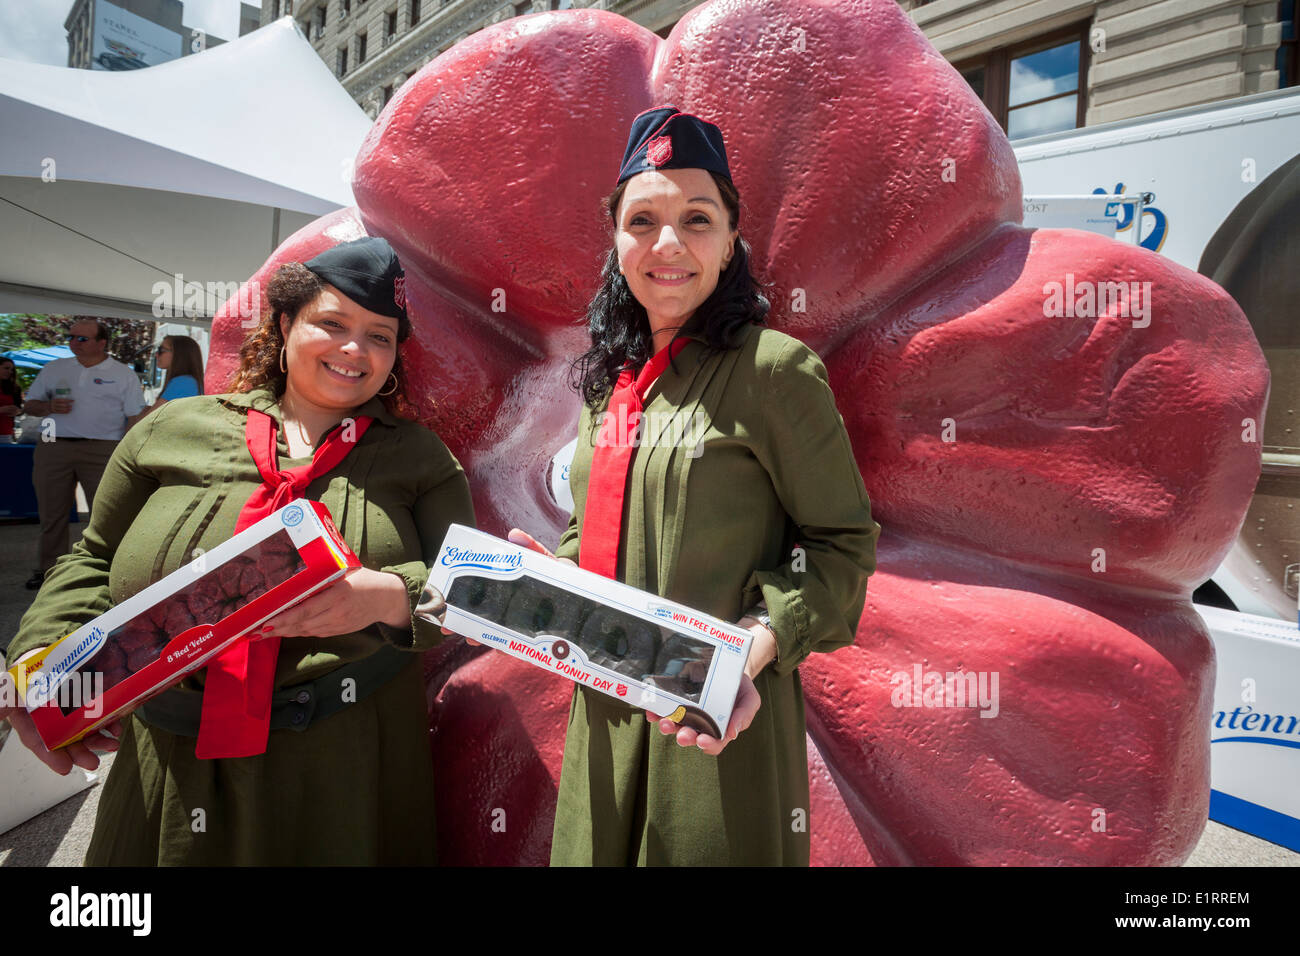 Models dressed as 'Donut Lassies' pose in front of a giant Entenmann's Red Velvet Donut replica Stock Photo